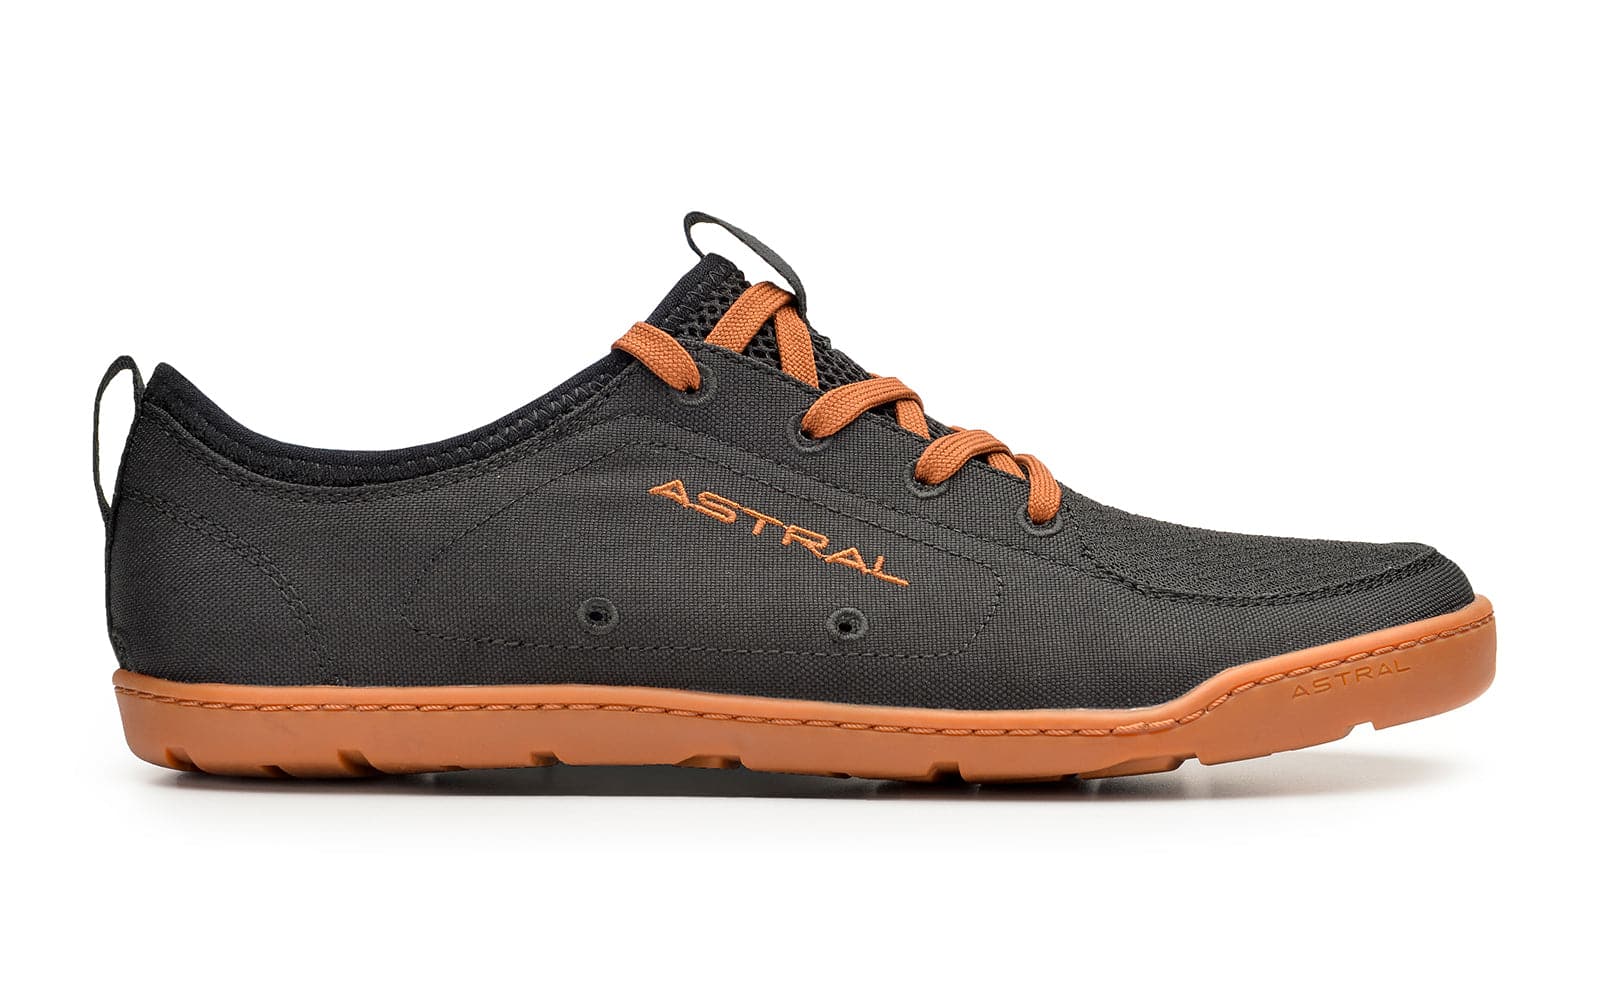 Featuring the Loyak - Men's men's footwear manufactured by Astral shown here from one angle.